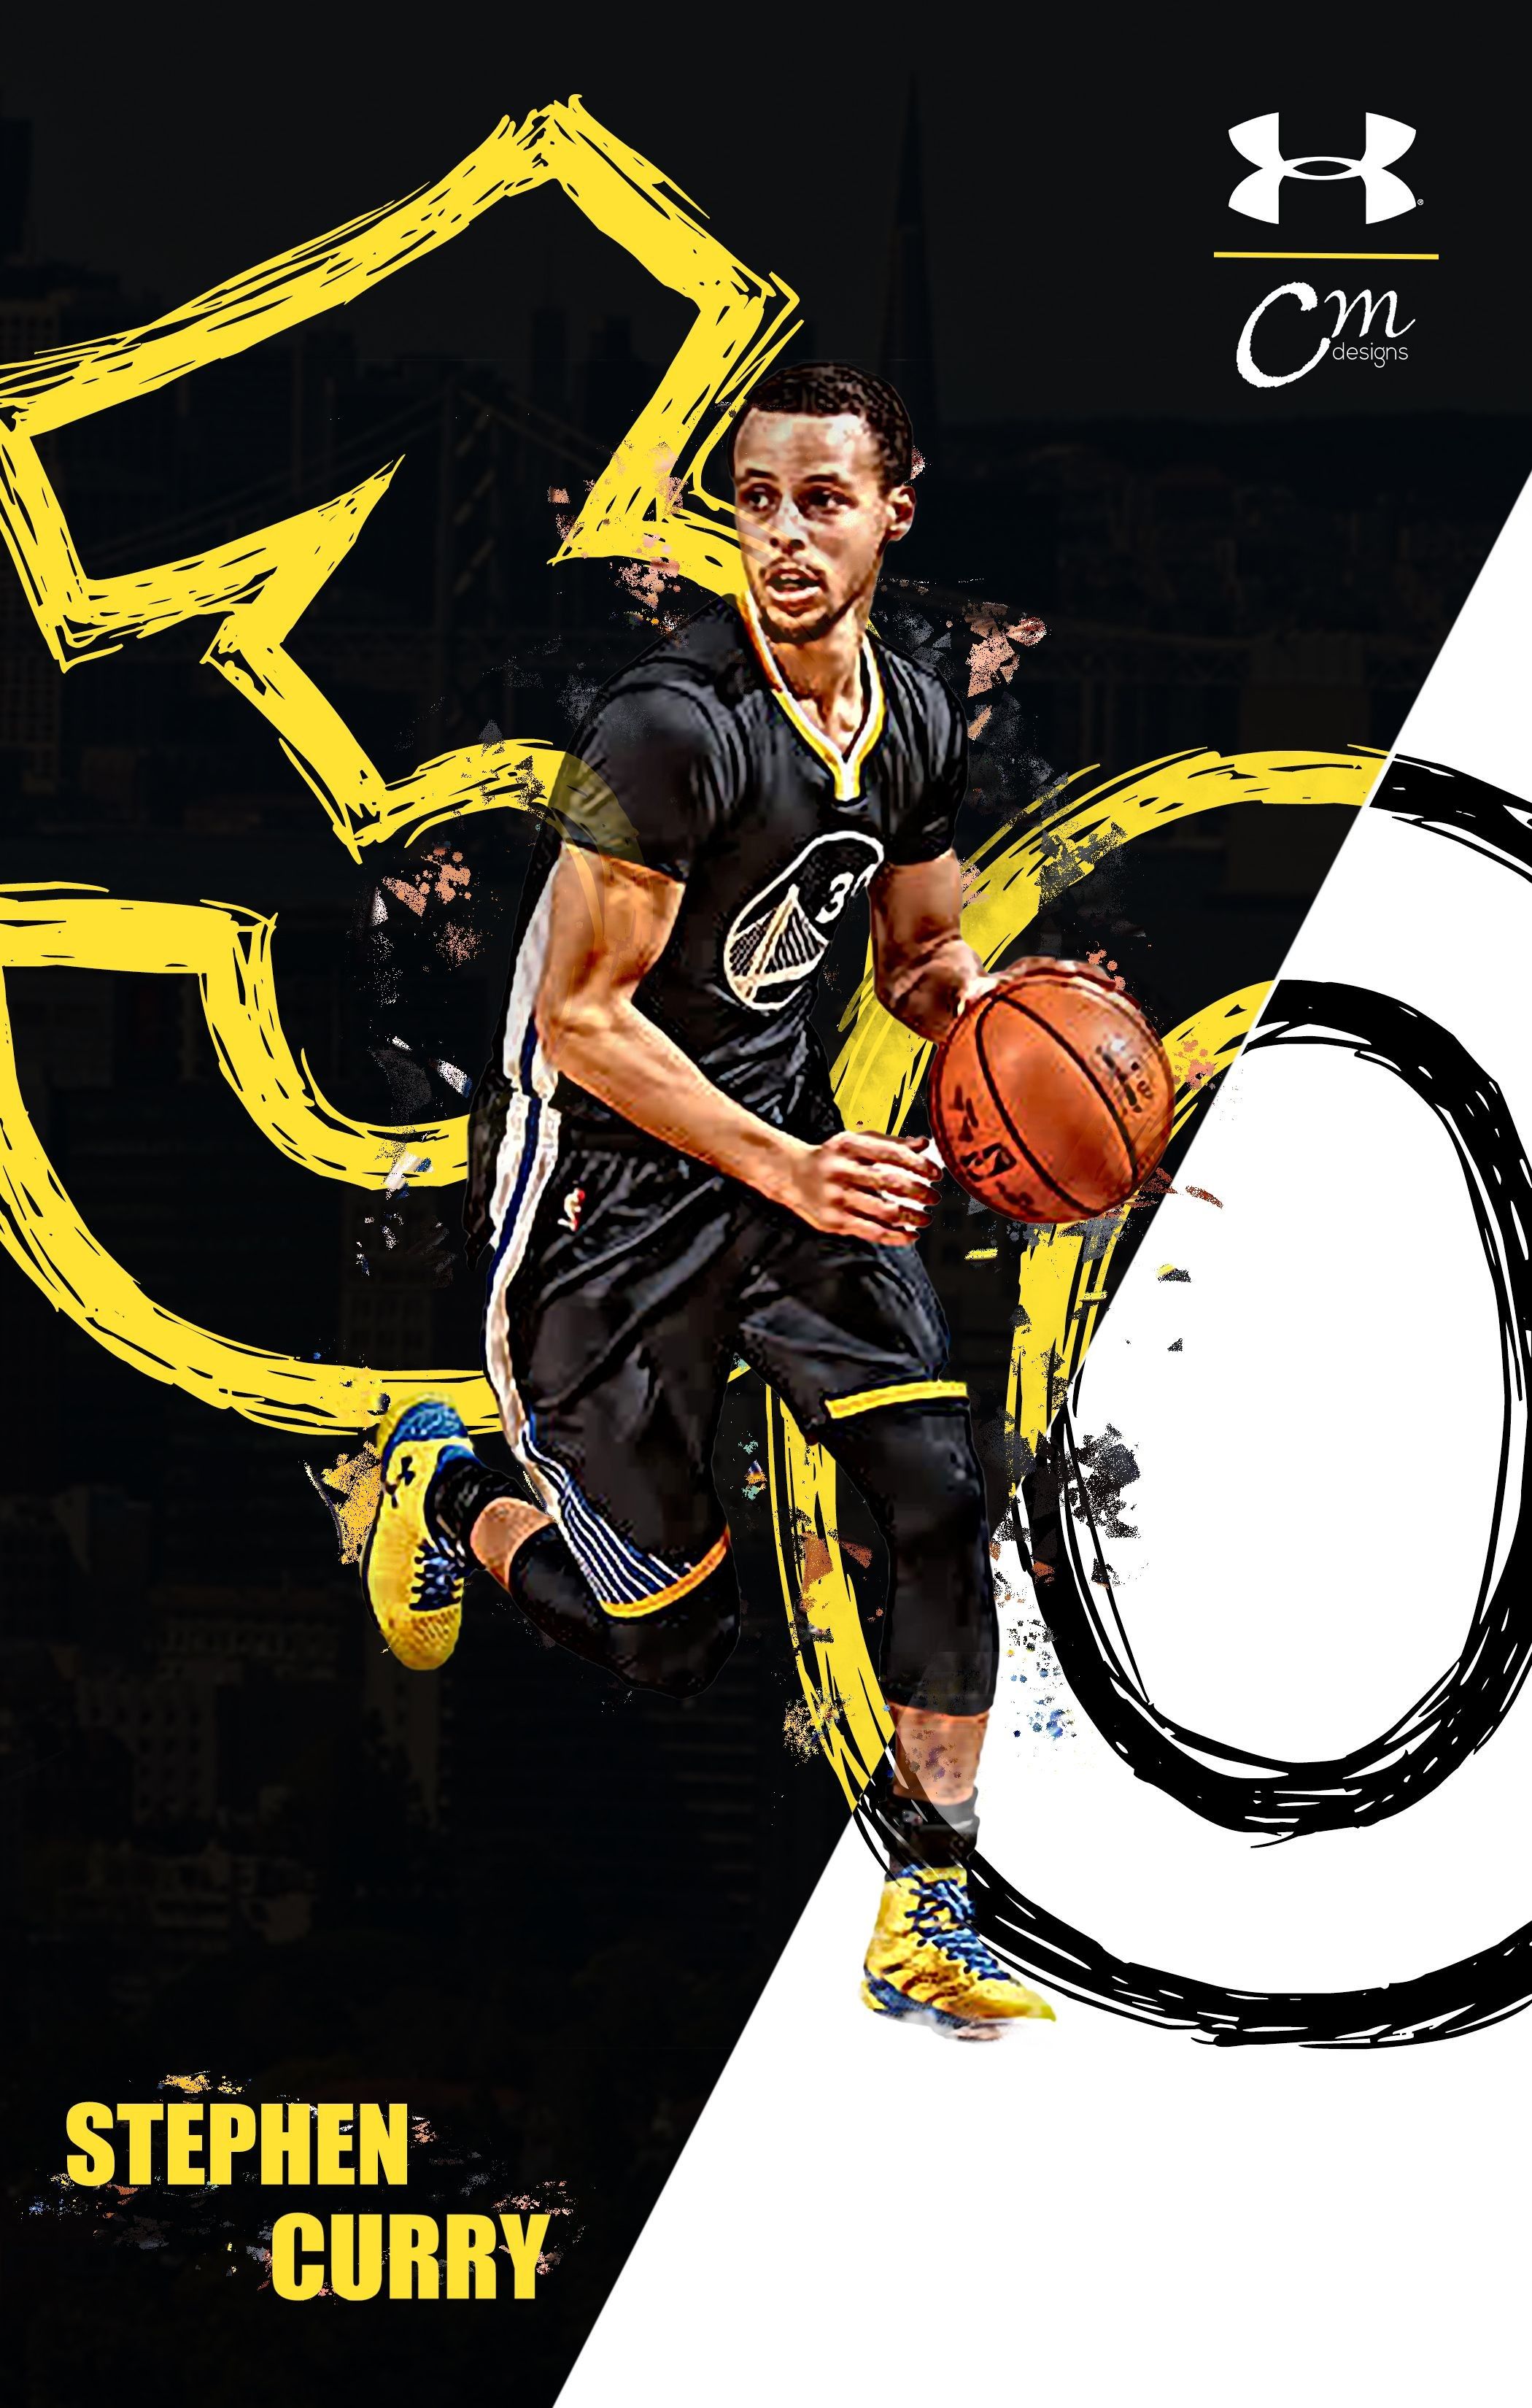 Stephen Curry Wallpaper background picture